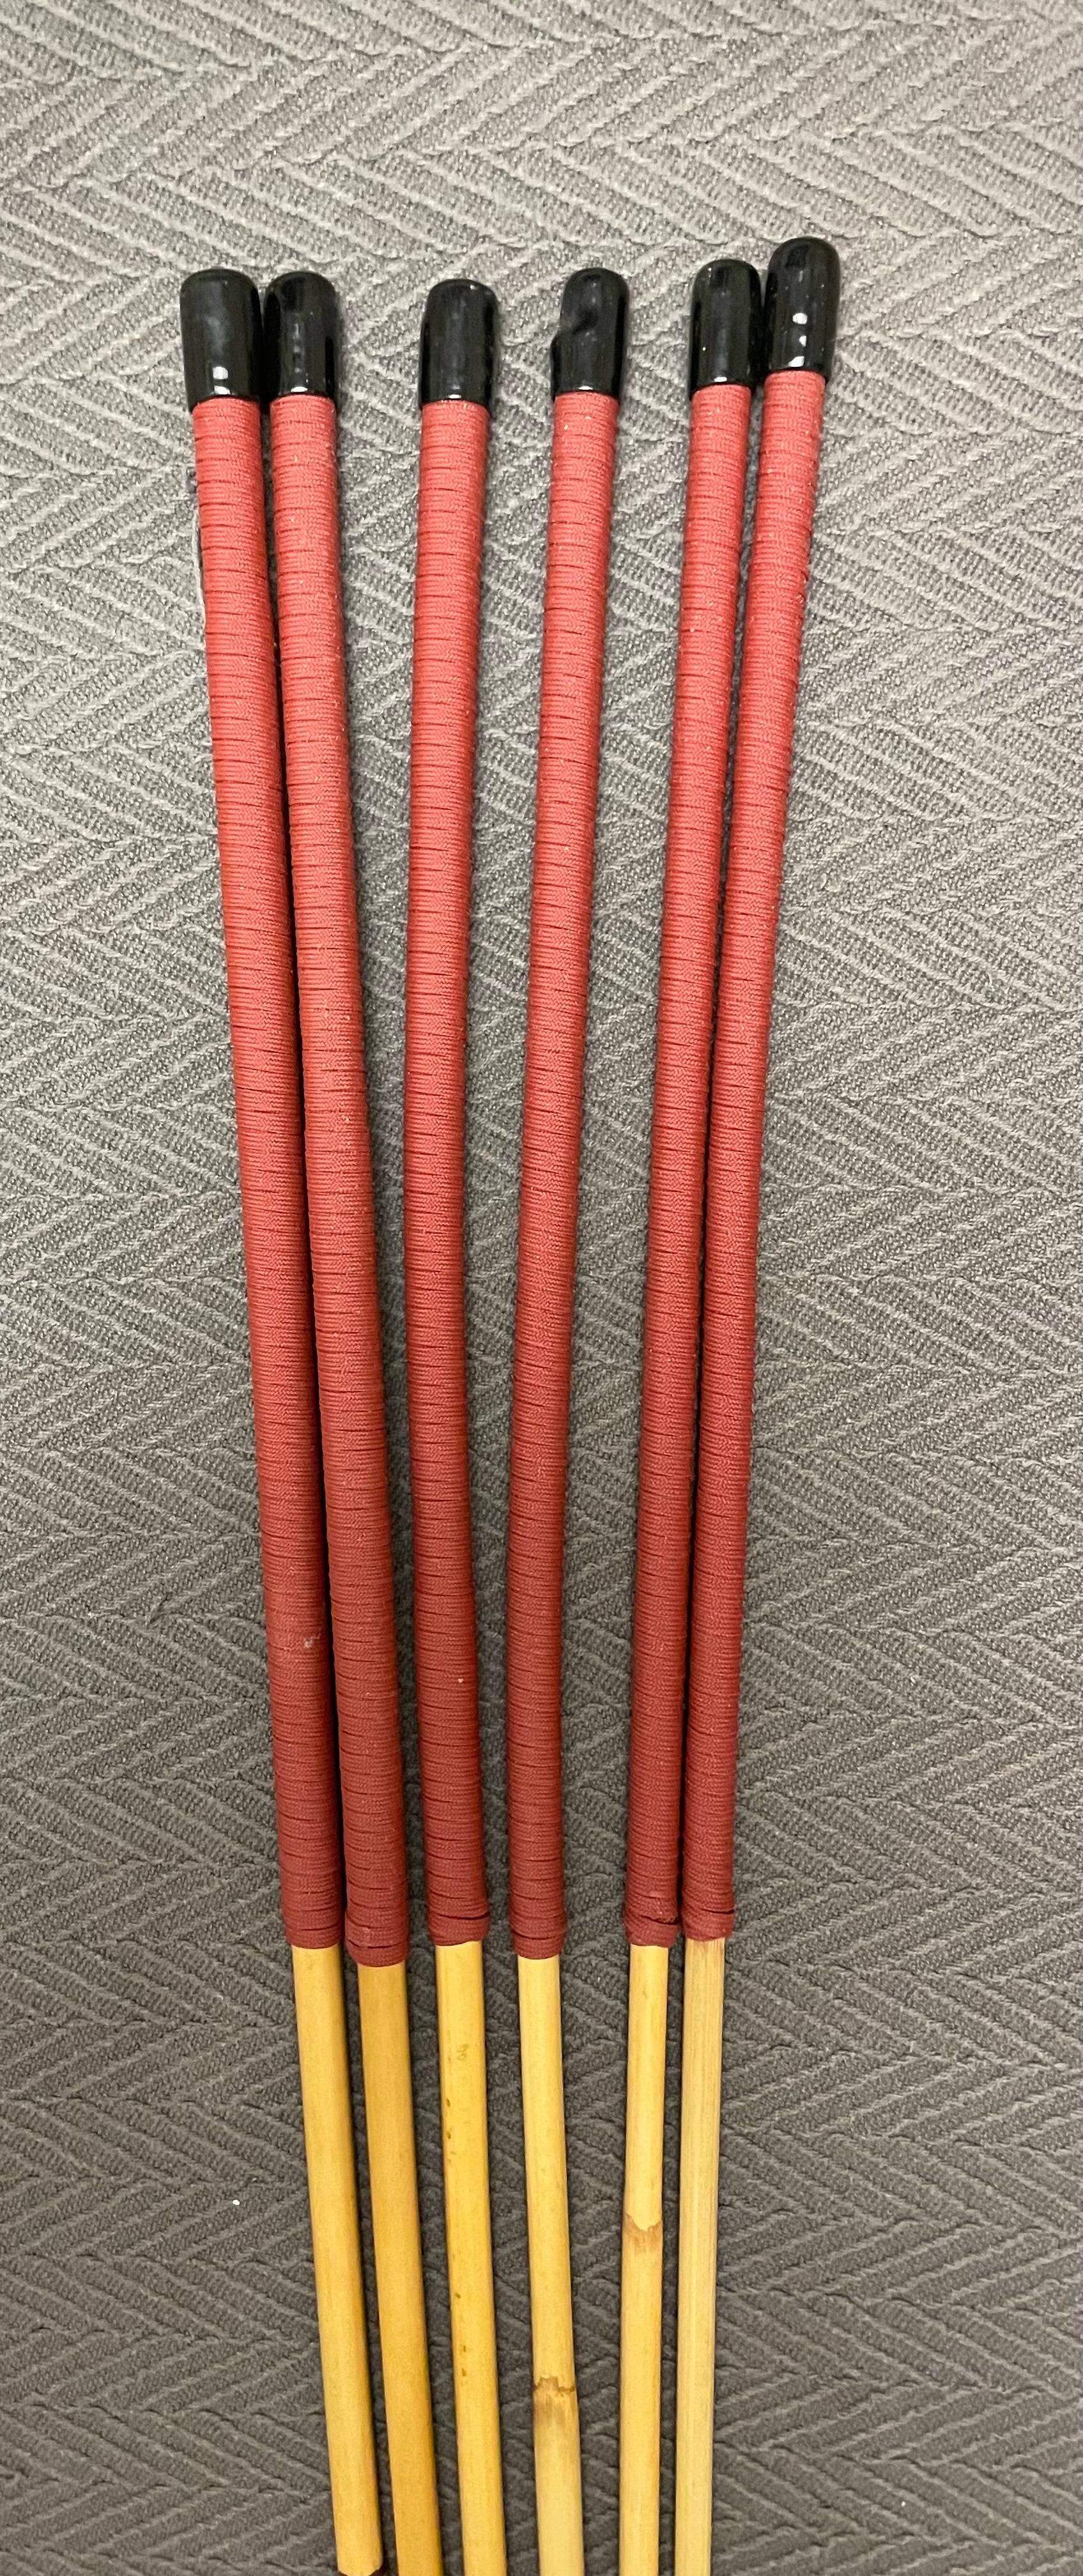 Thick and Thuddy Classic Dragon Canes / Whipping Canes / BDSM Canes Set of 6  - 110 cms Length - BRICK RED Paracord Handles - Englishvice Canes